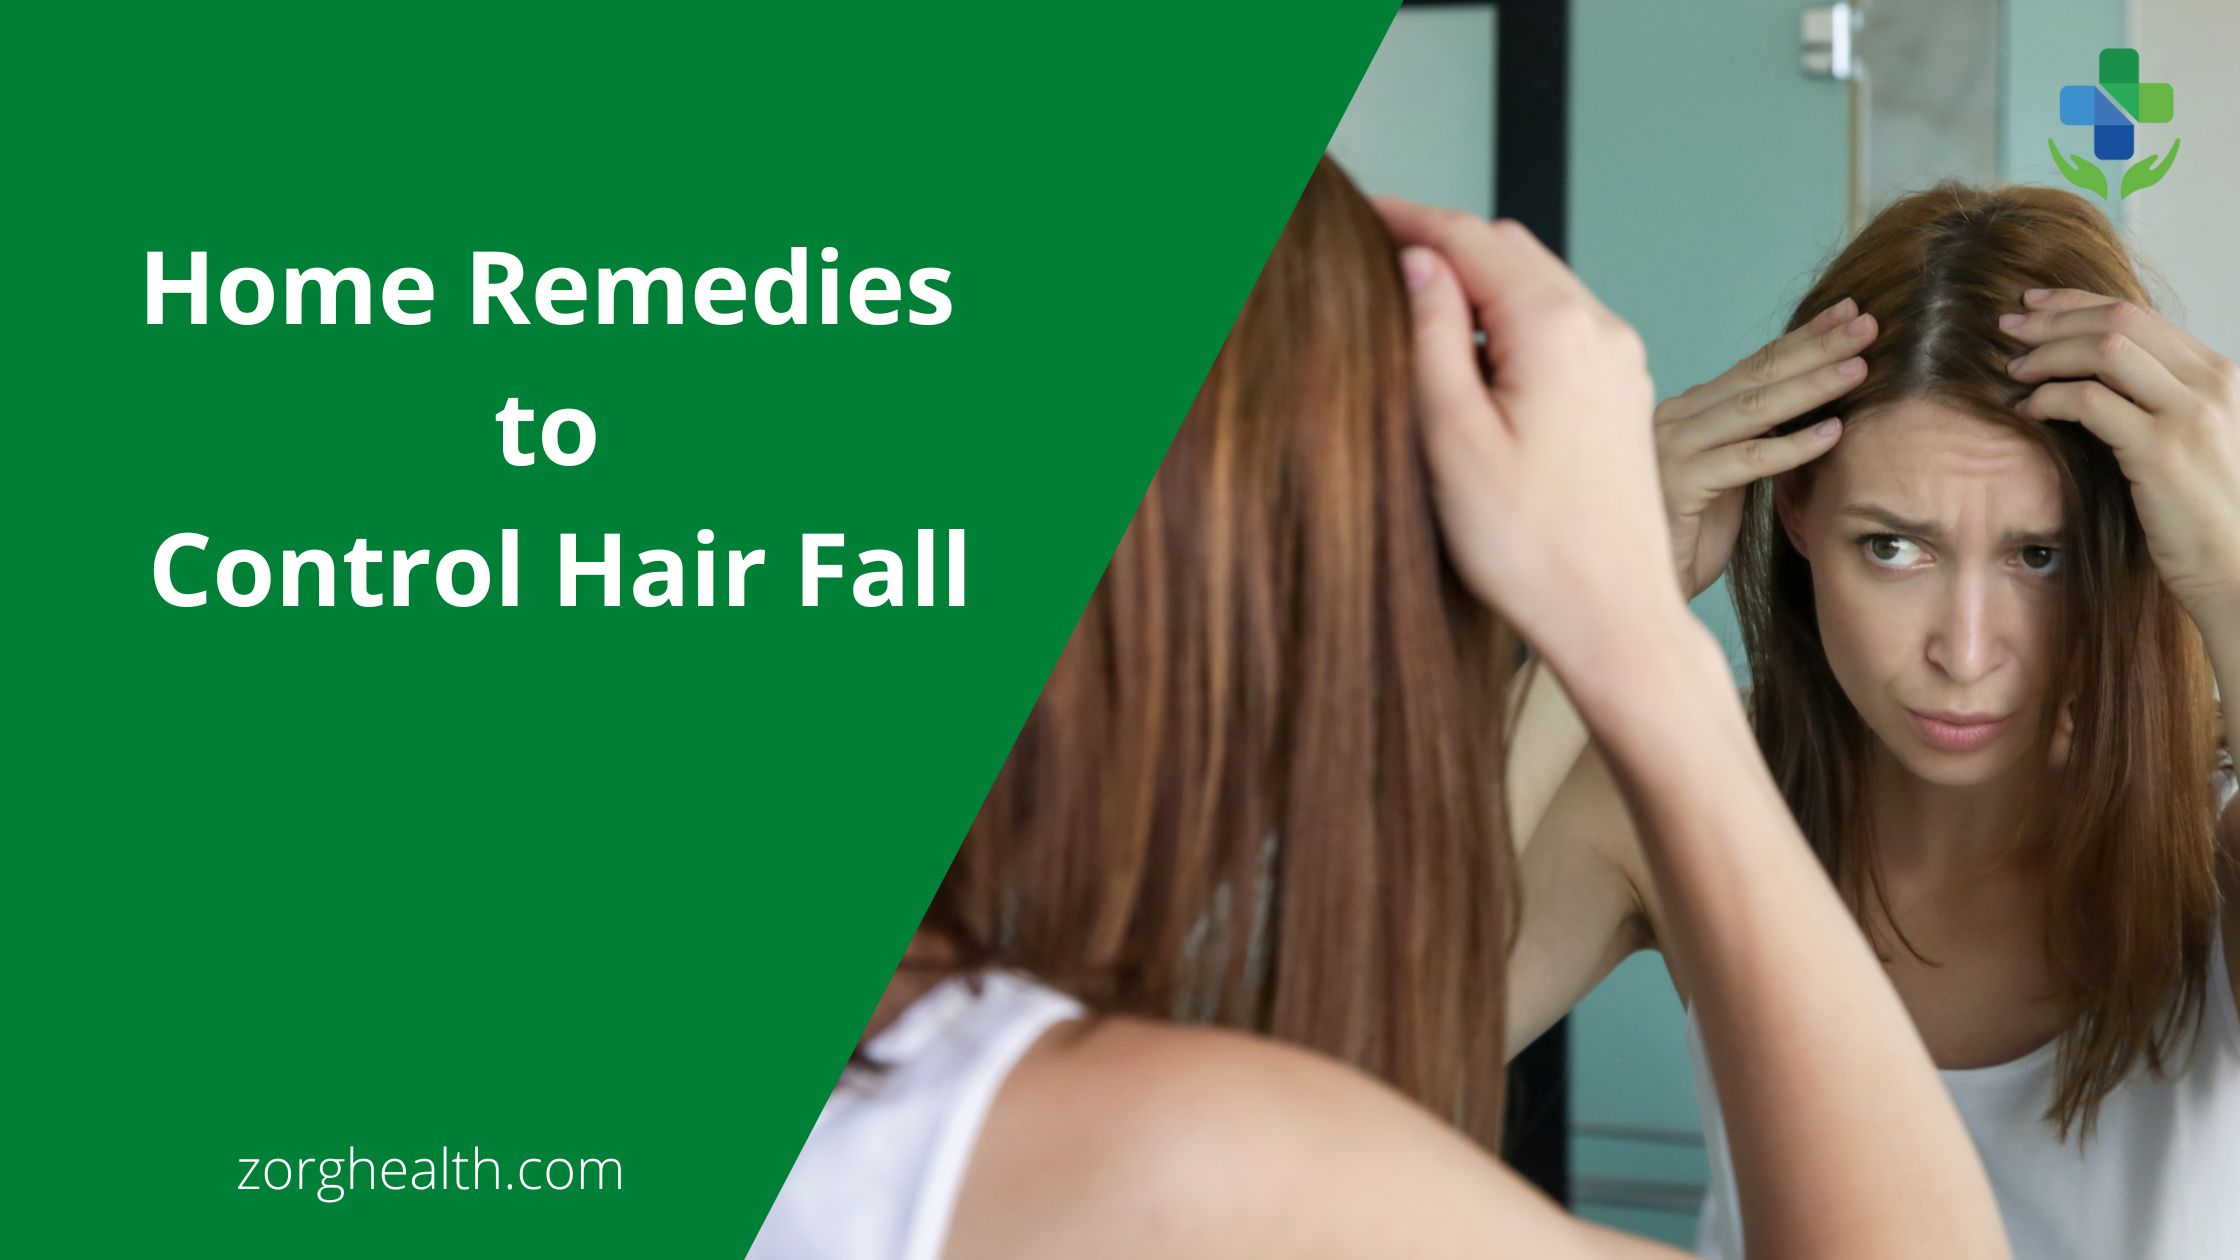 Home Remedies to Control Hair Fall